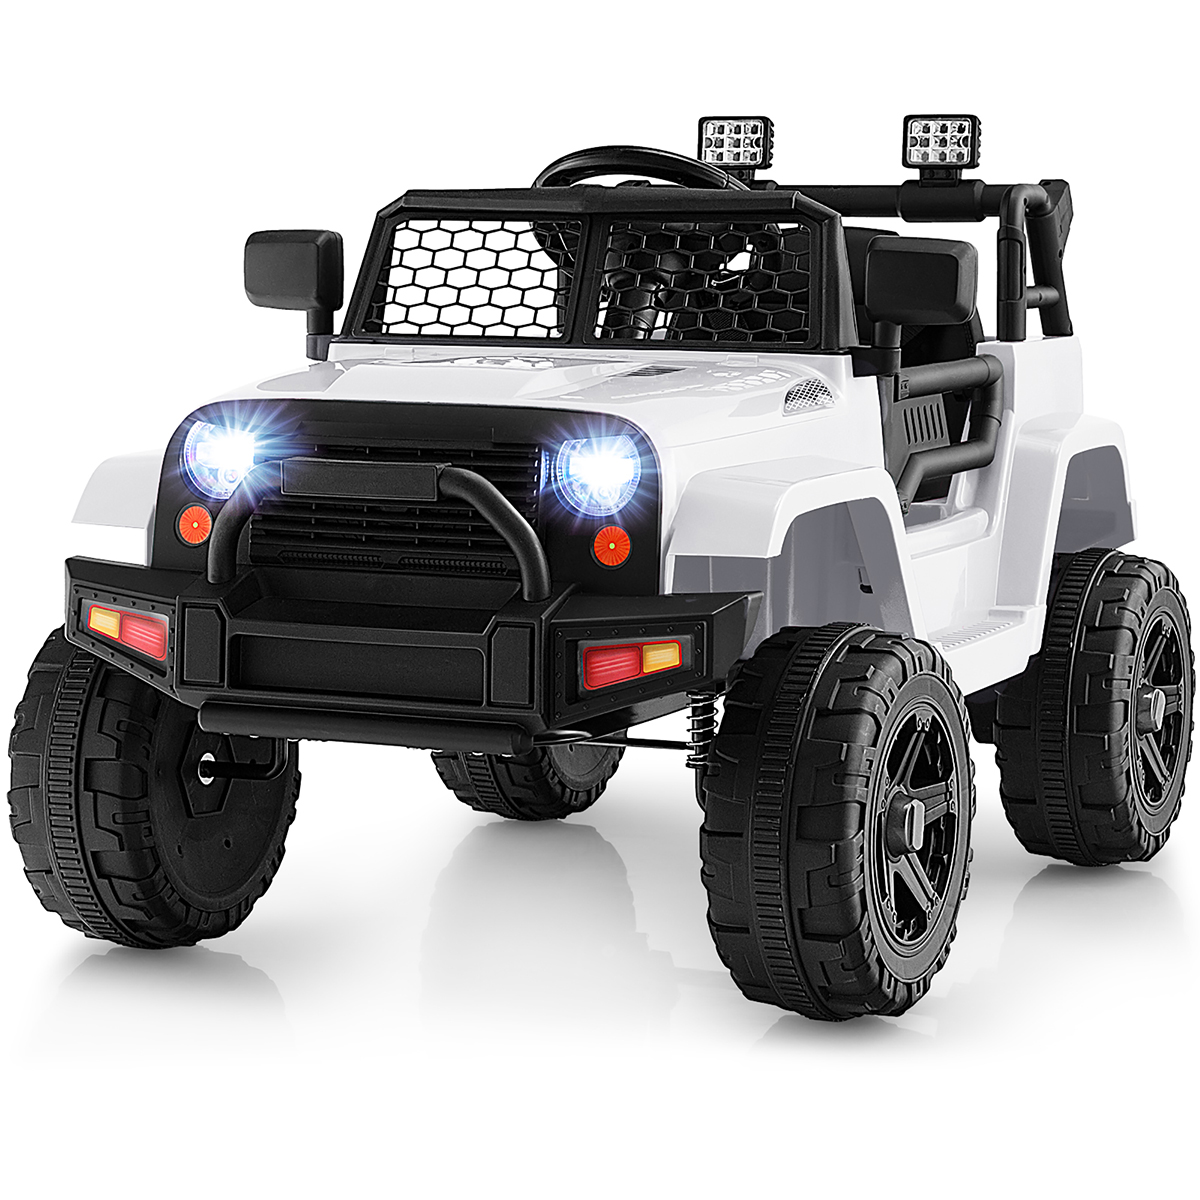 Photos - Kids Electric Ride-on Goplus Kids' 12V Ride-on Truck with Remote and Headlights - Kids Truck Whi